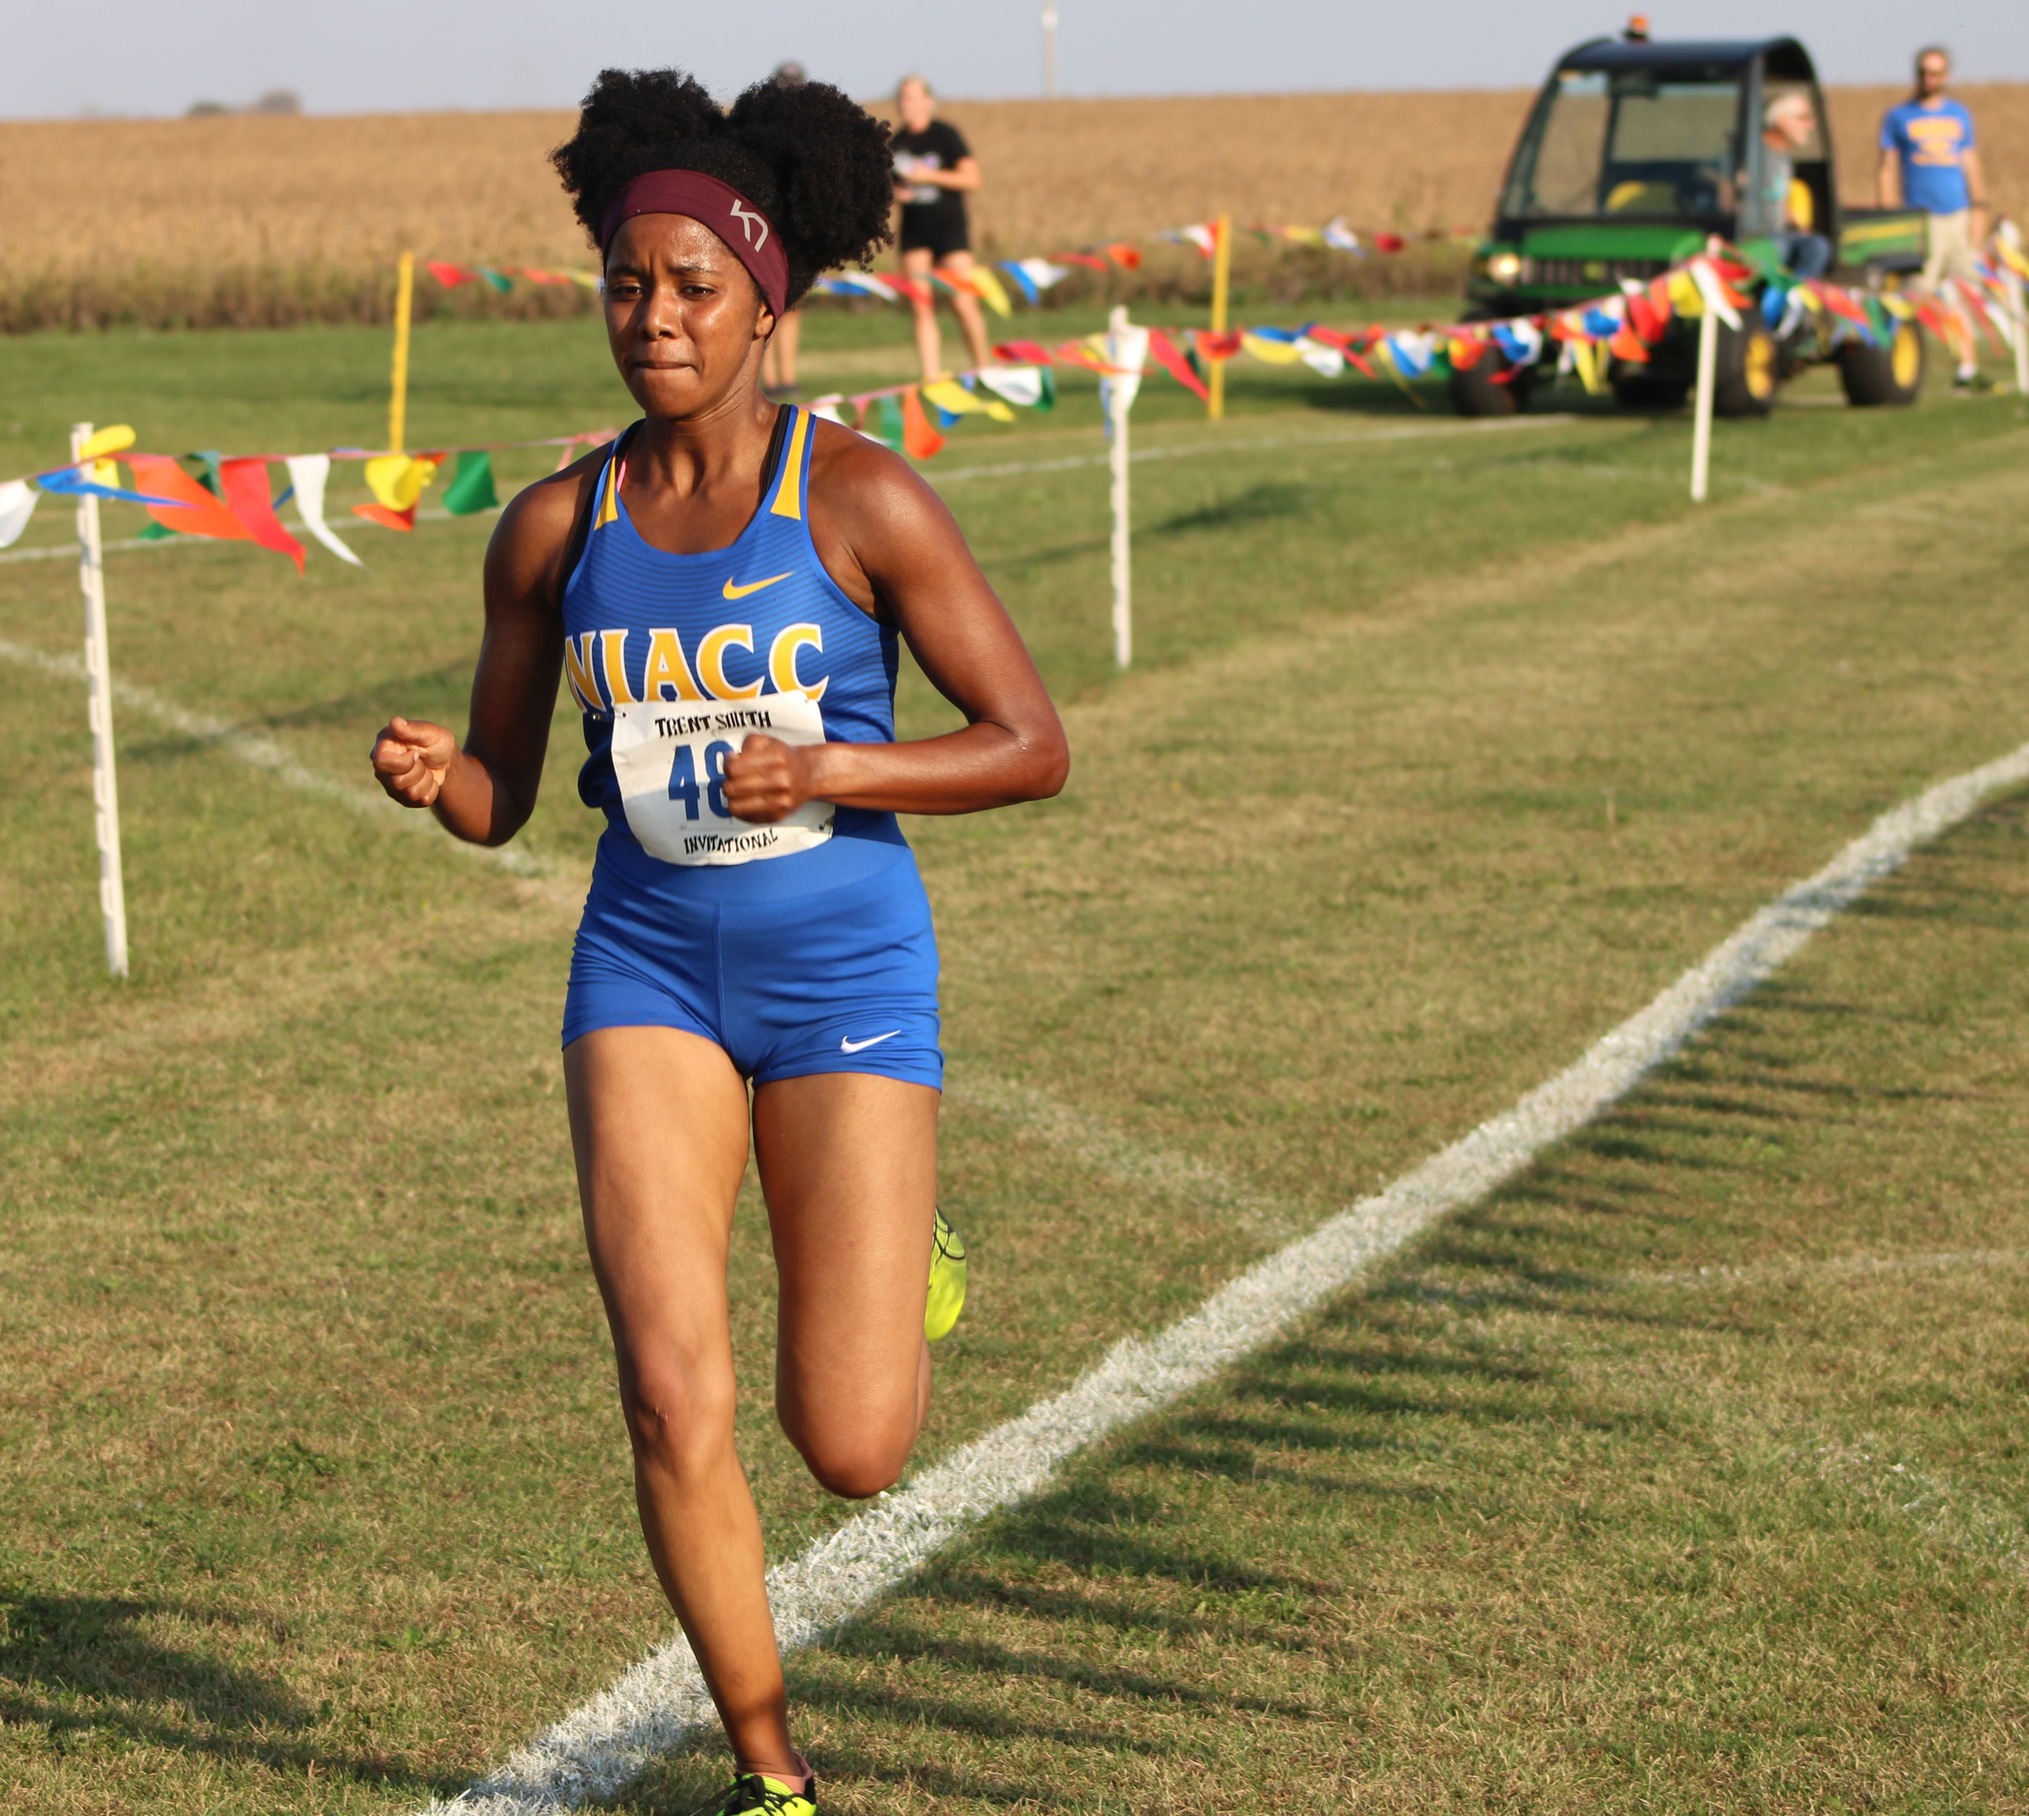 NIACC's Sarah Bertry was selected as the USTFCCCA NJCAA Division II cross country female athlete of the week on Monday.